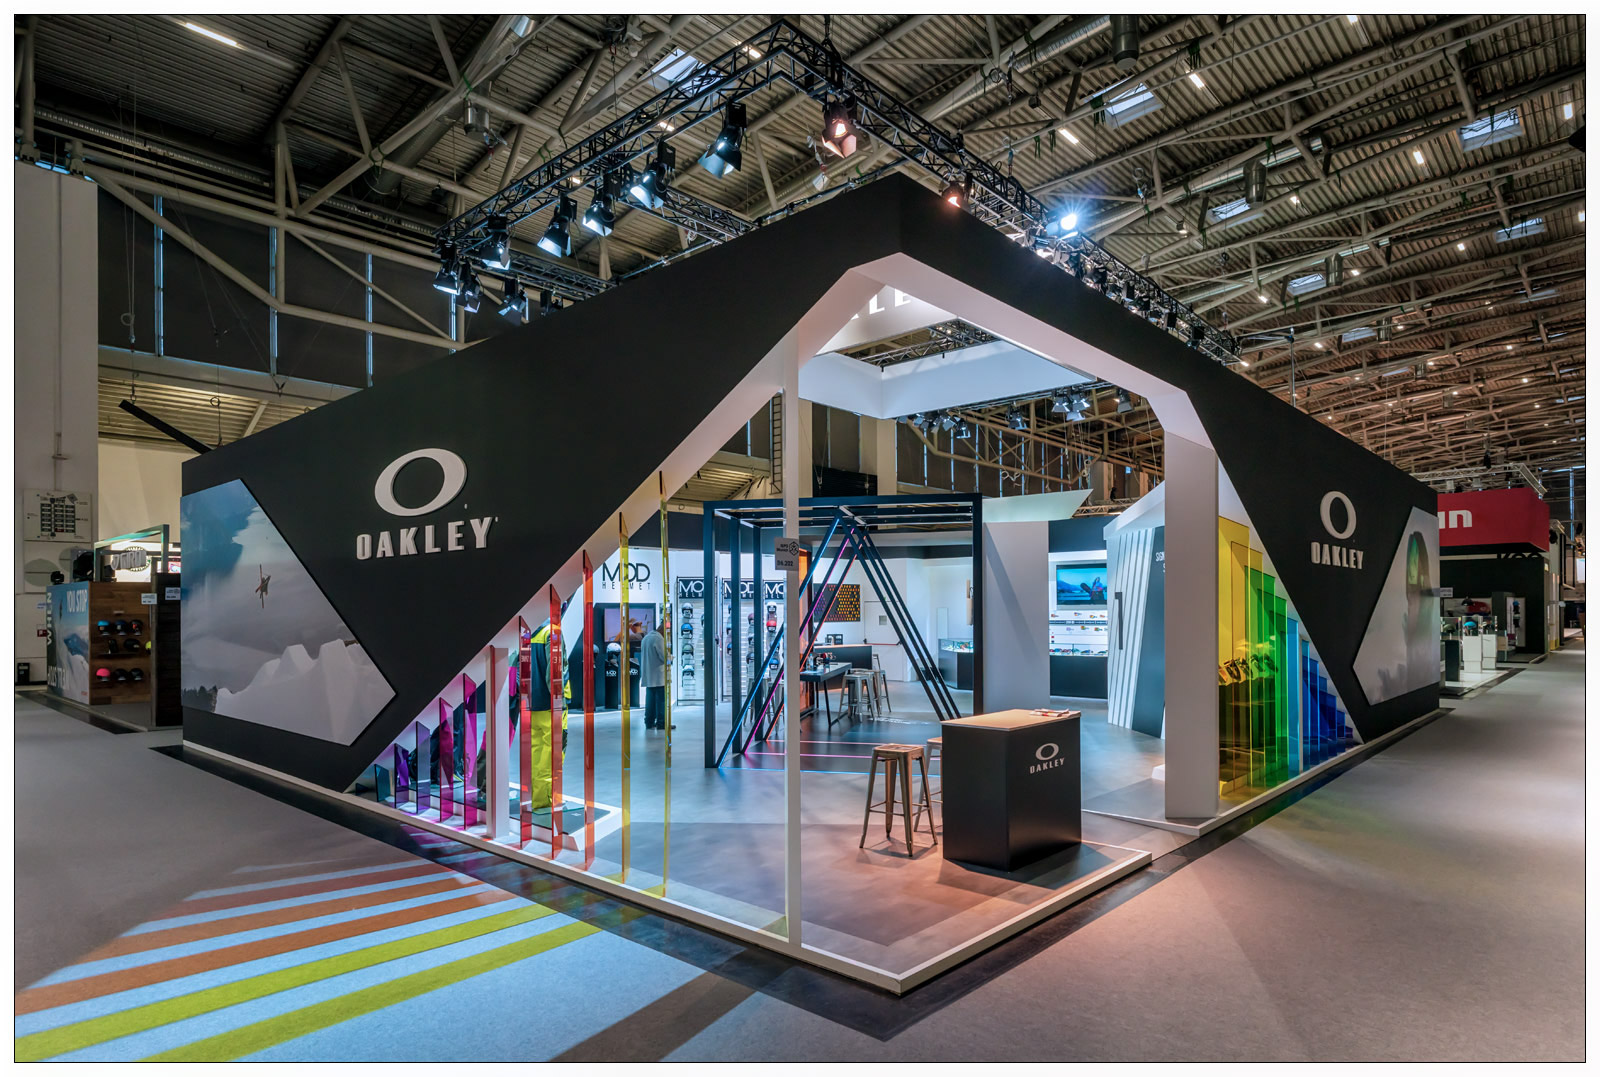 Ispo-2019-Messe-München-Messestand-Beleuchtung